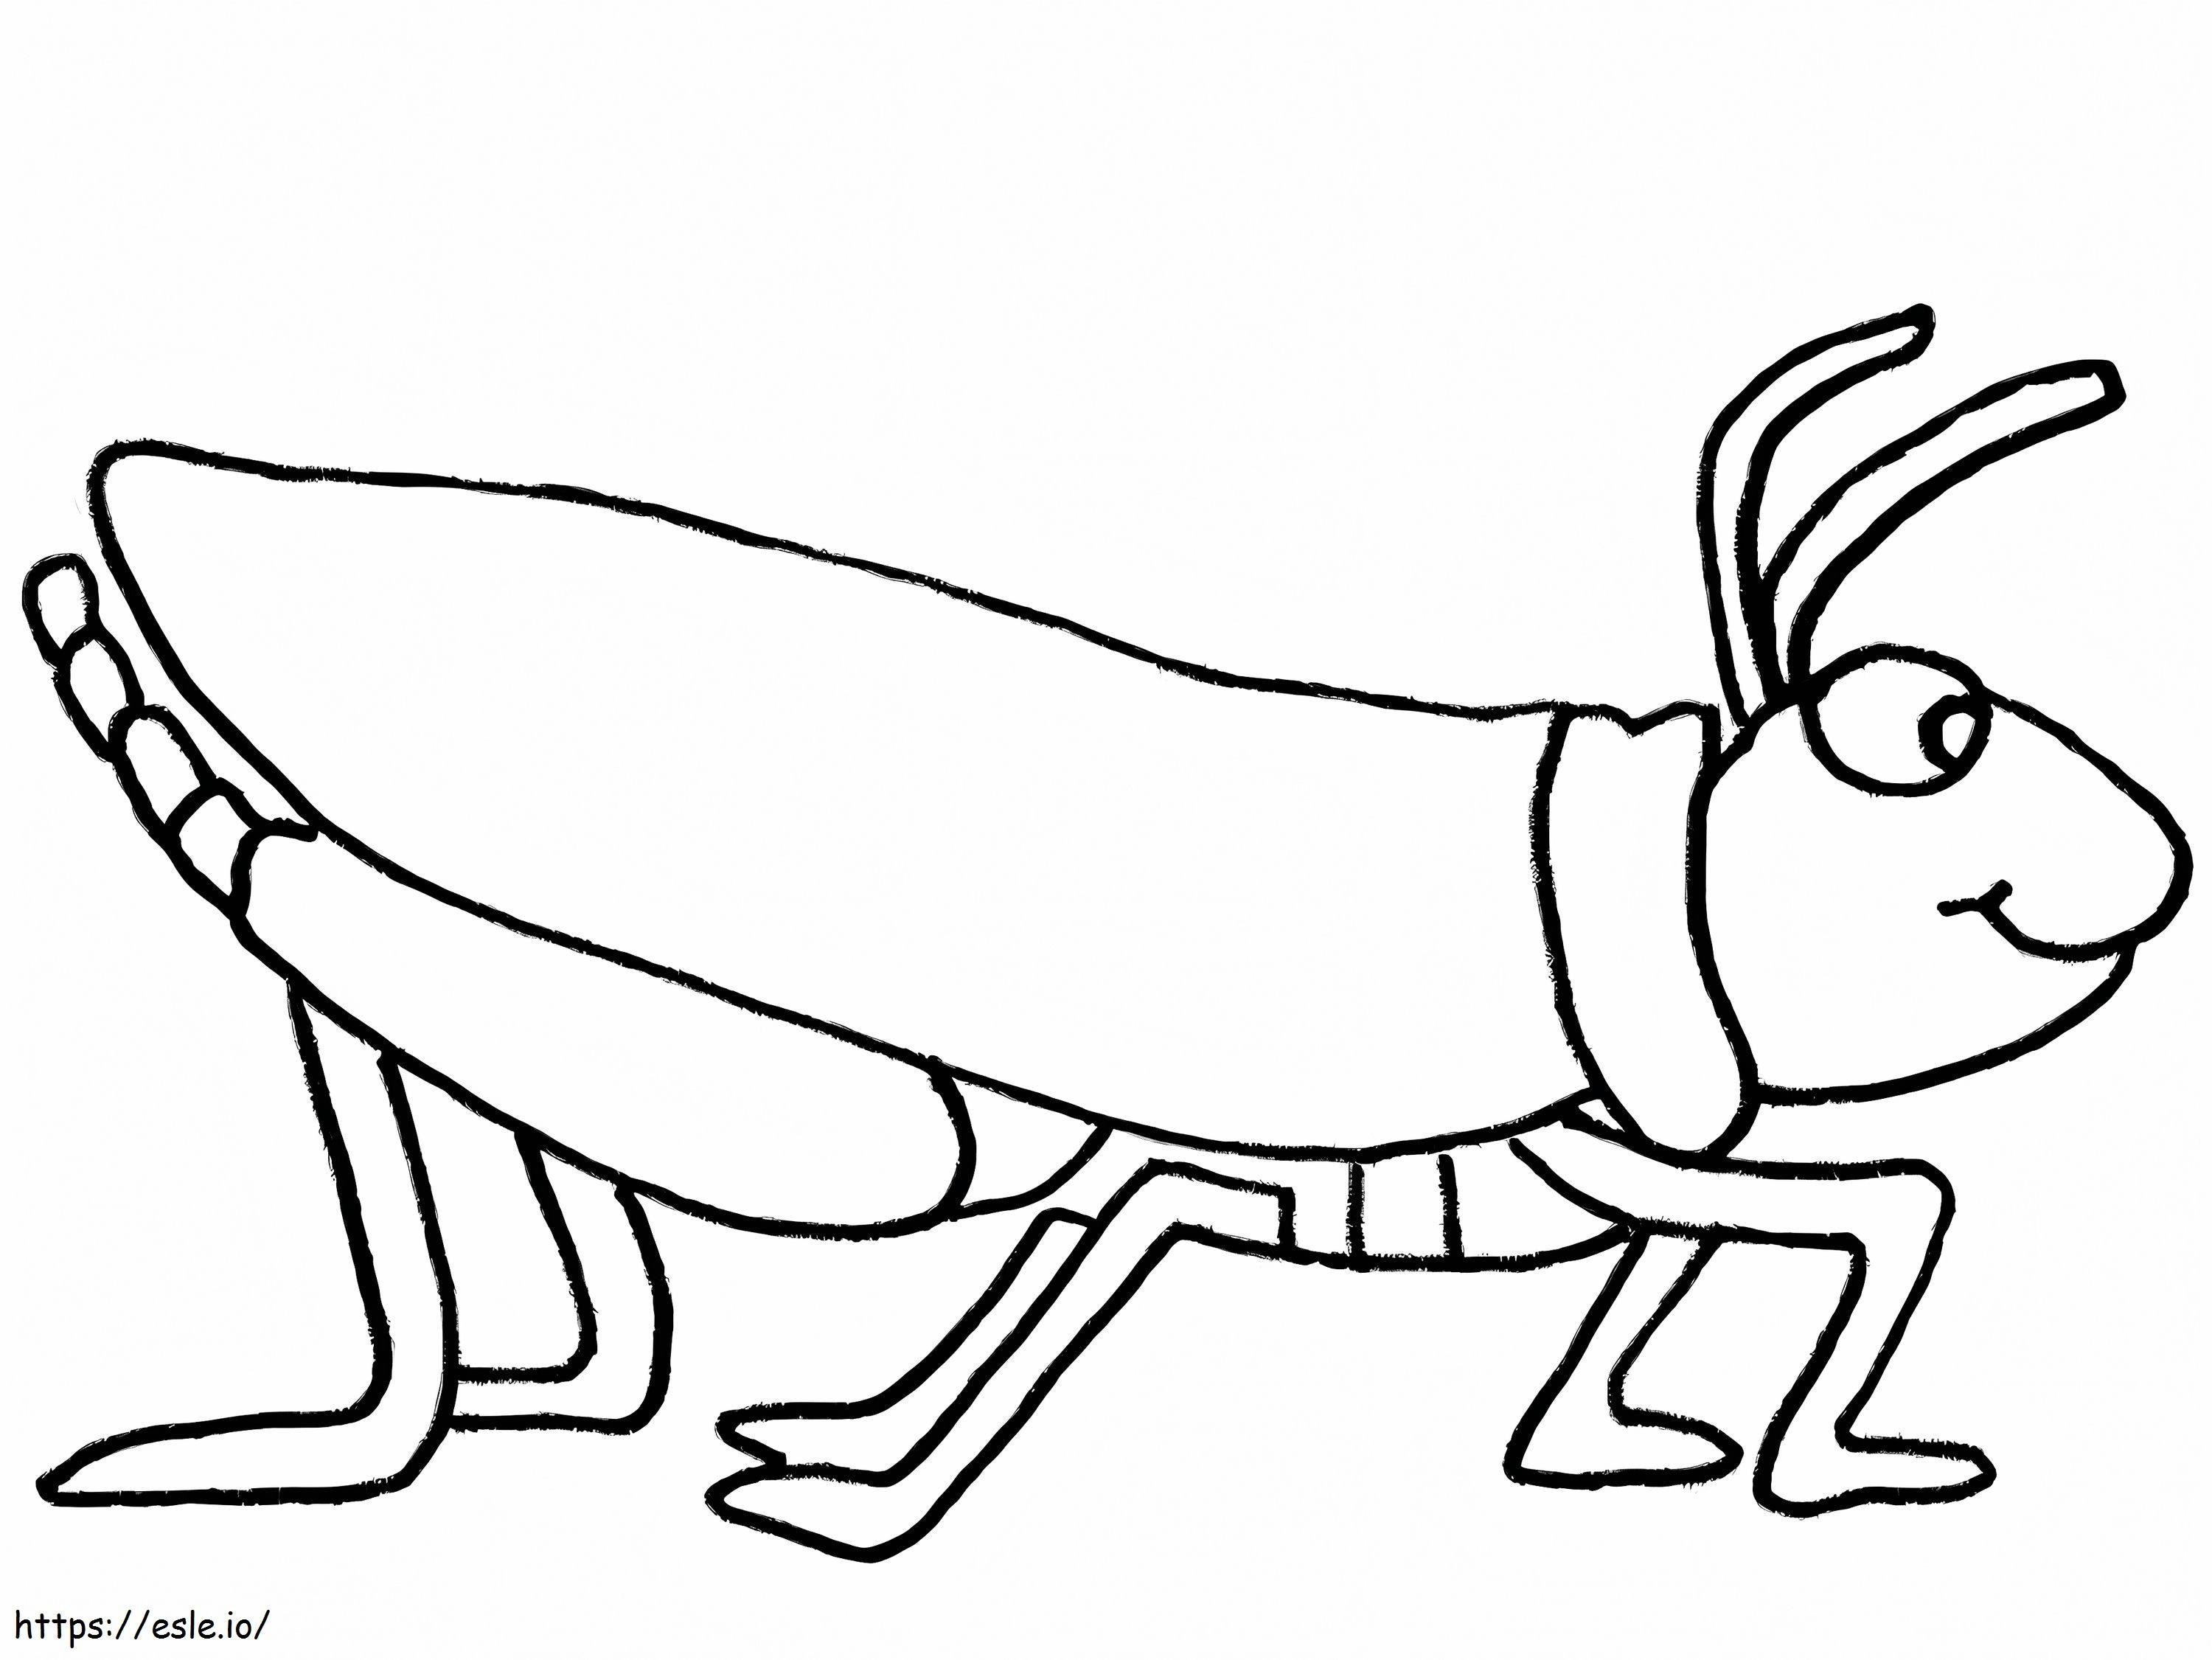 Awesome Grasshopper coloring page